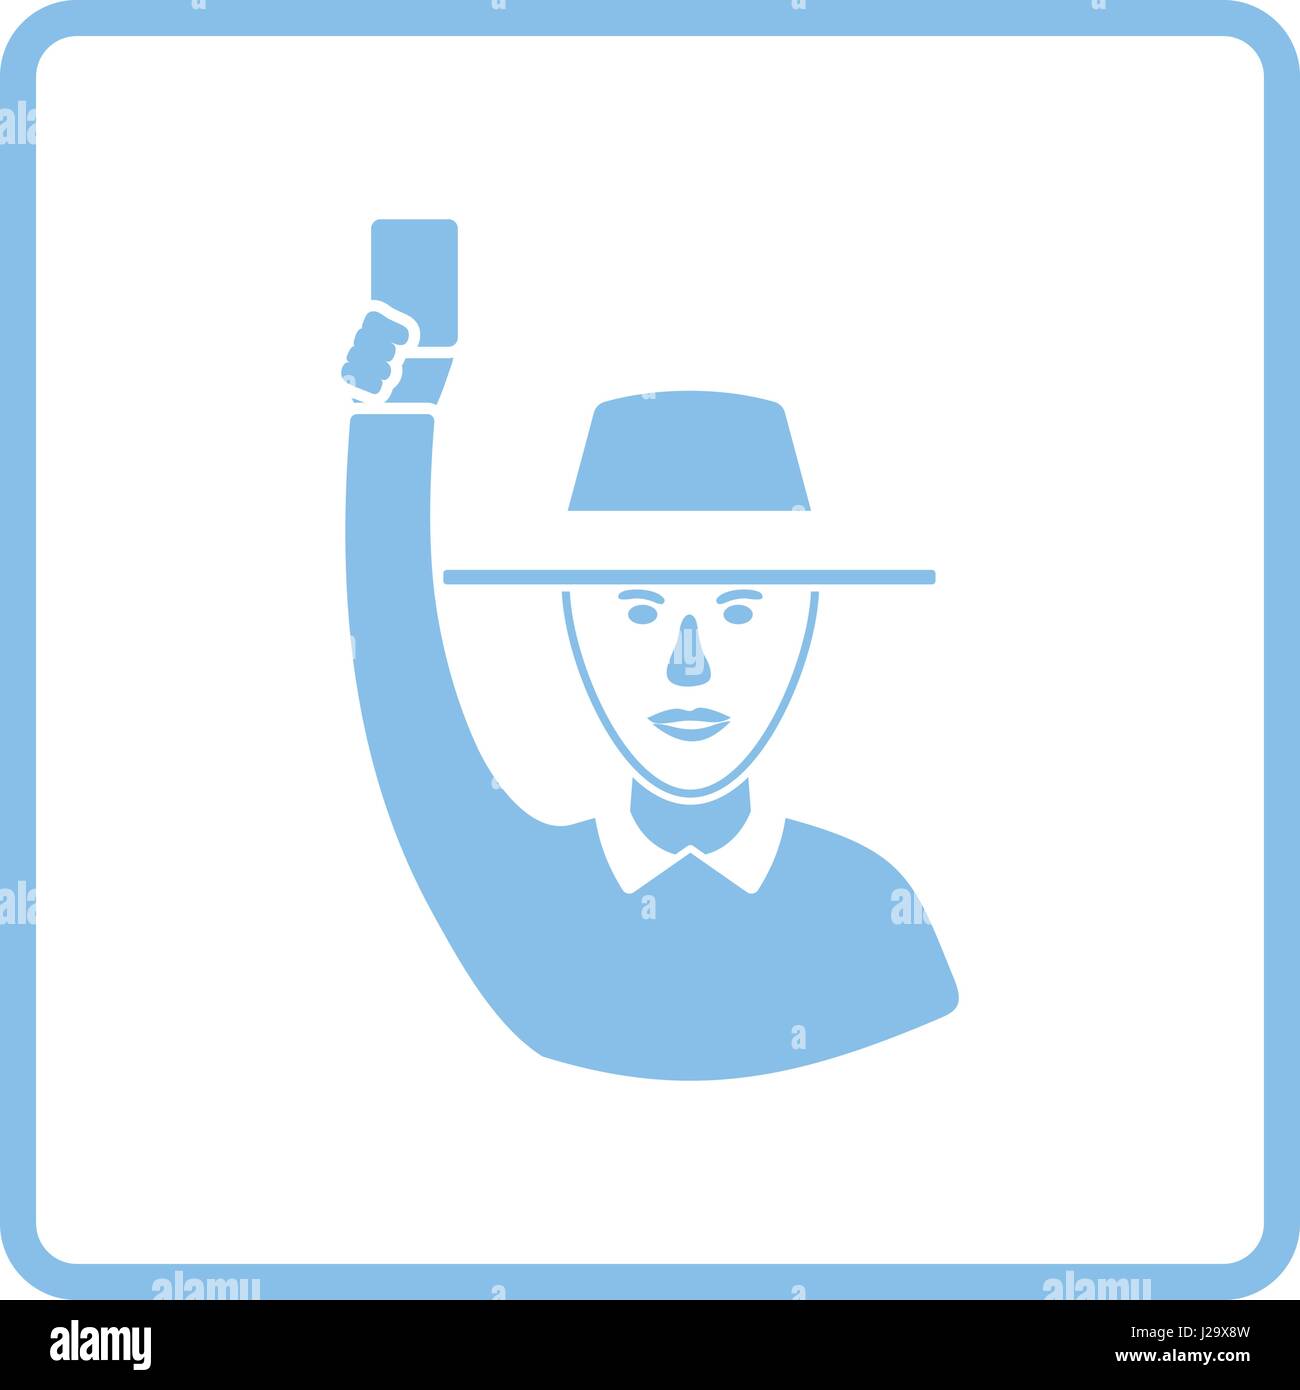 Cricket umpire with hand holding card icon. Blue frame design. Vector illustration. Stock Vector